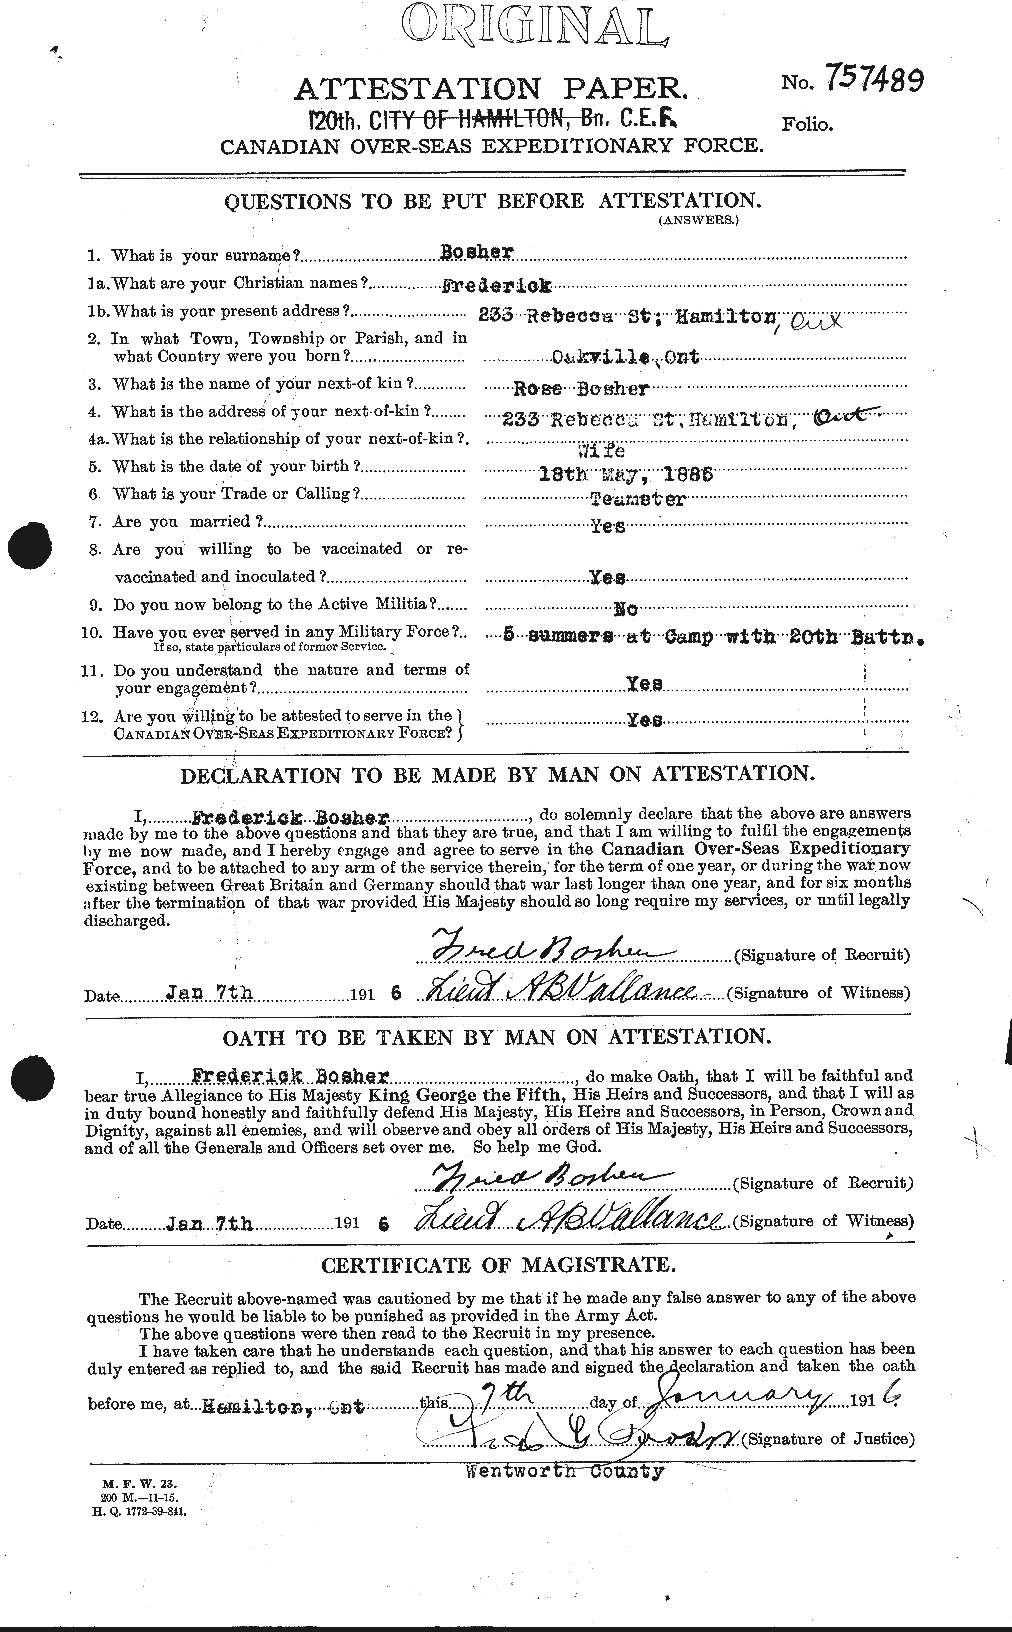 Personnel Records of the First World War - CEF 251772a